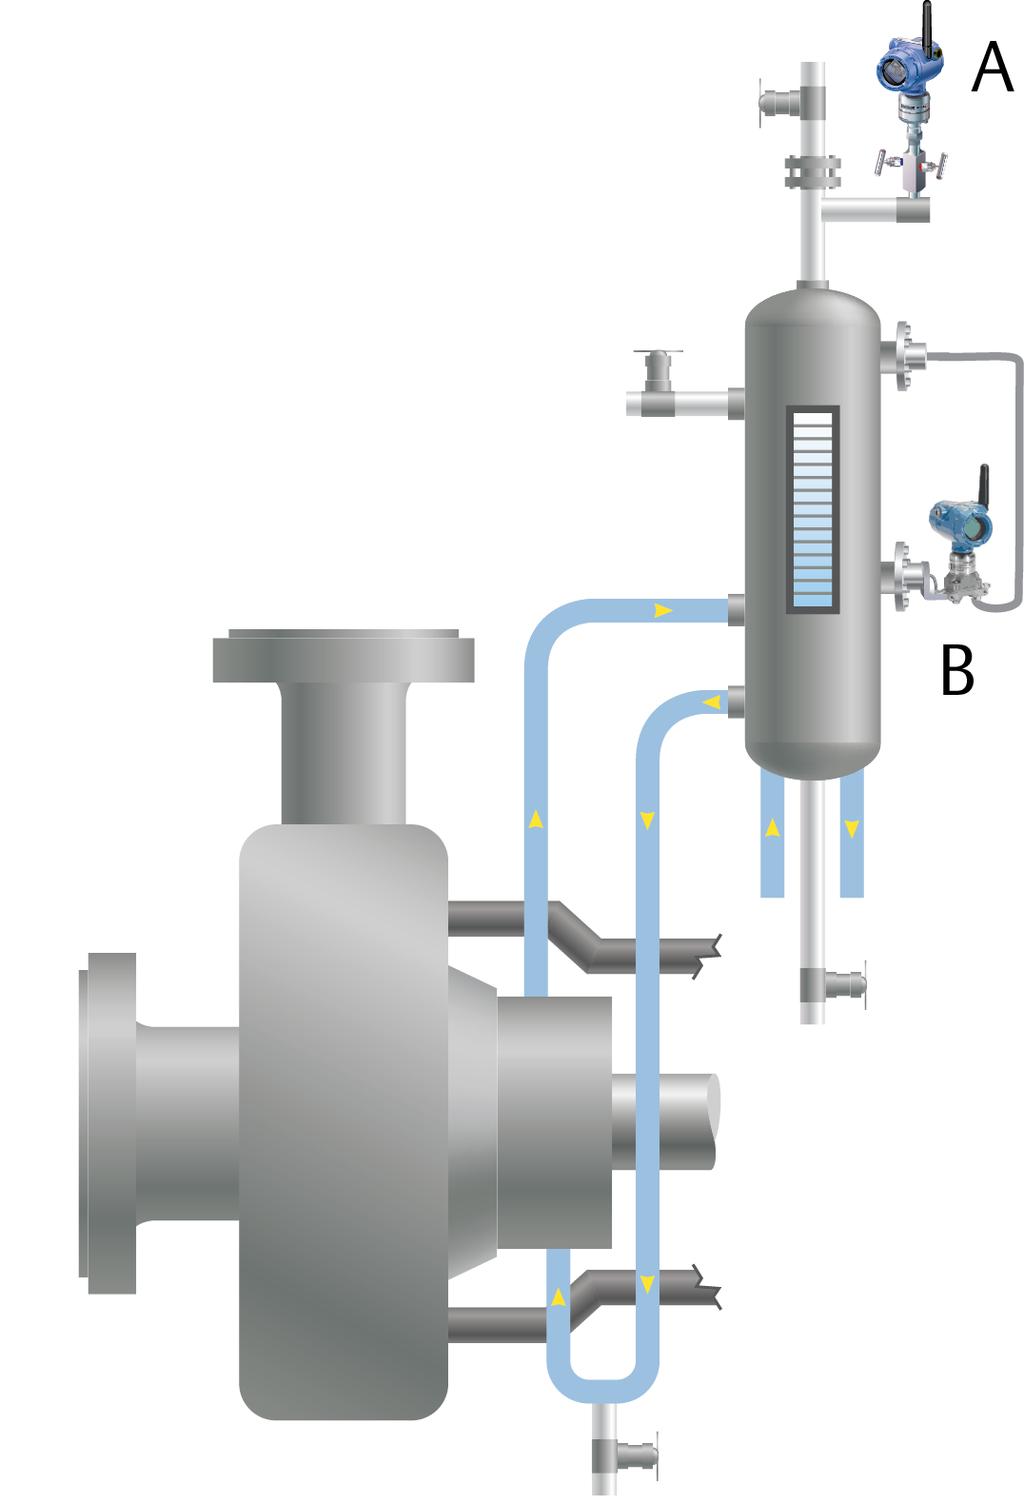 Plan 53 A (Figure 2) defines a pressurized system that uses an external source of pressurization, such as nitrogen.